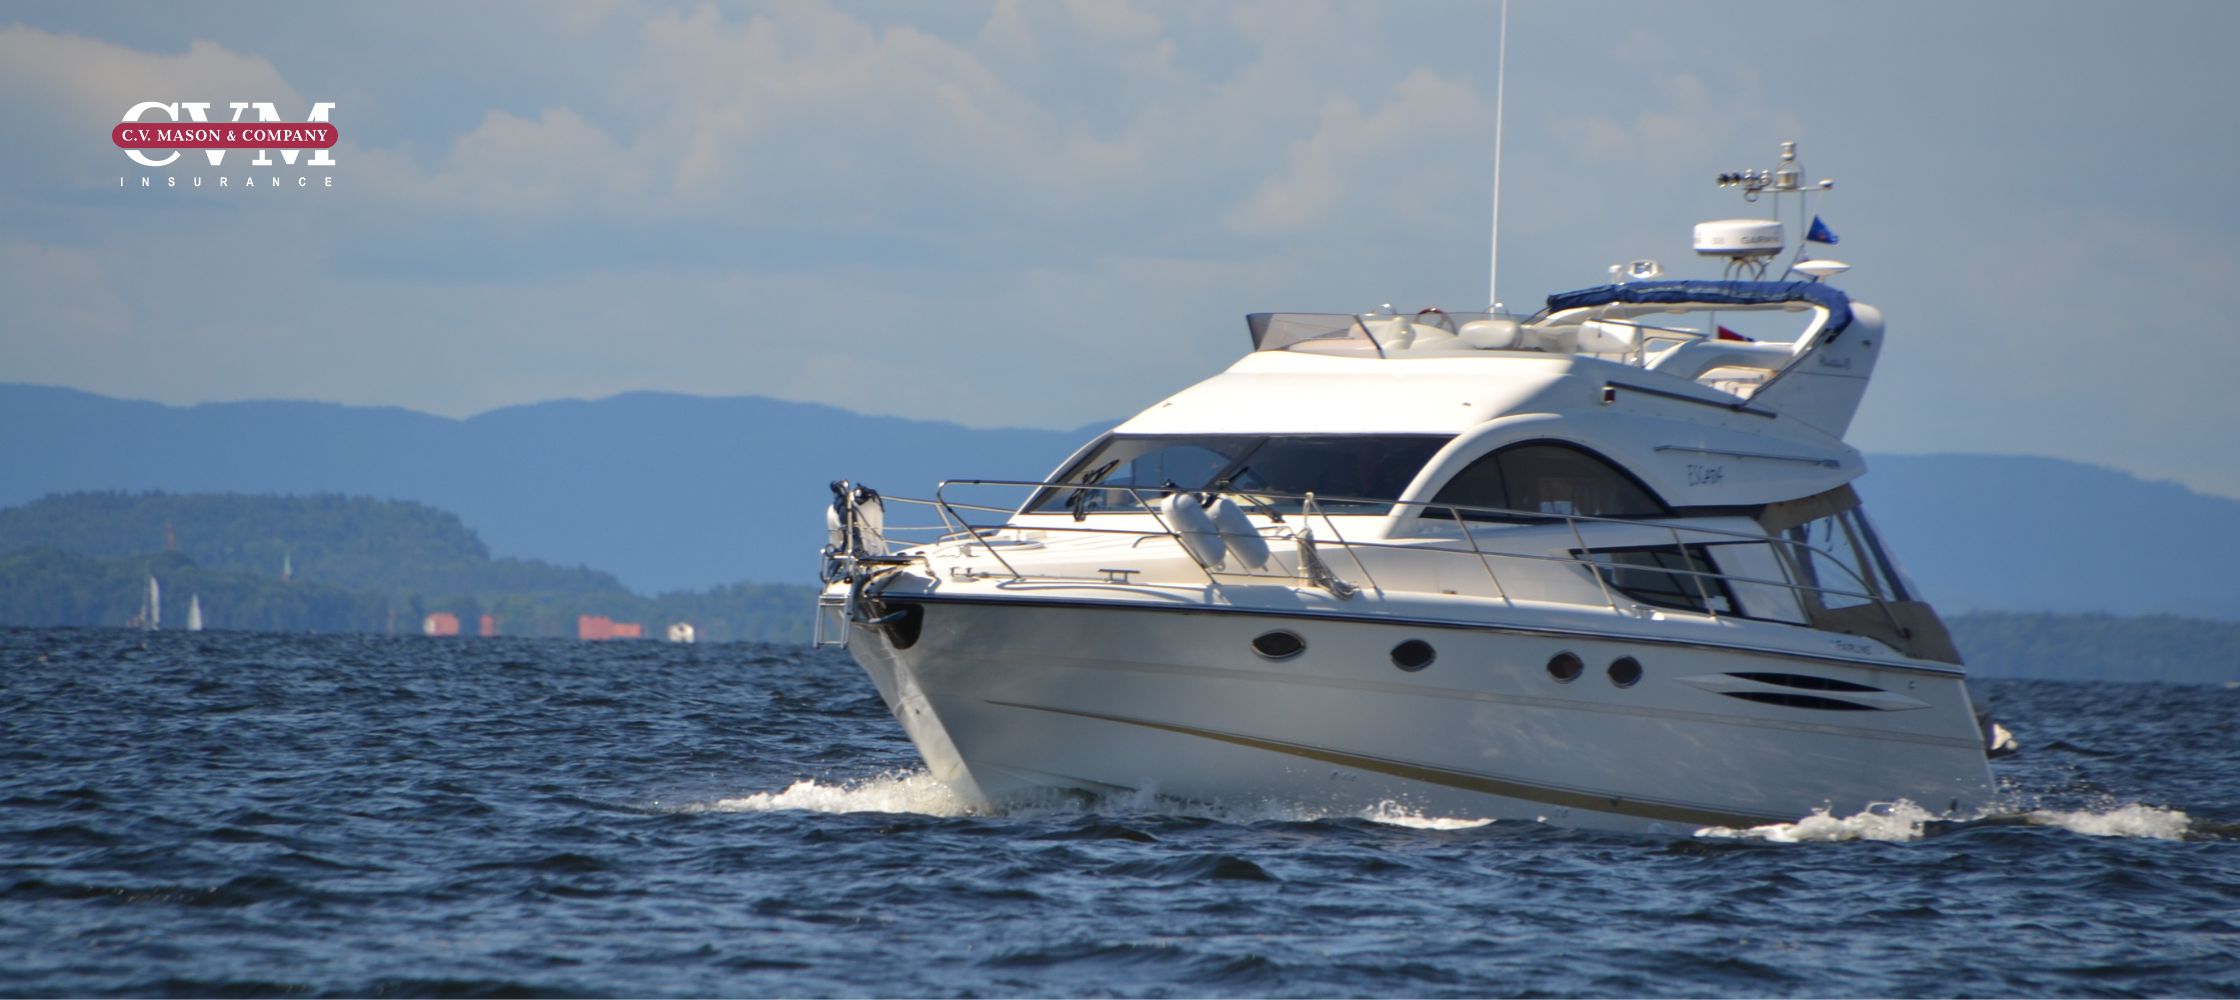 What You Need to Know About Boat Insurance and Theft Protection